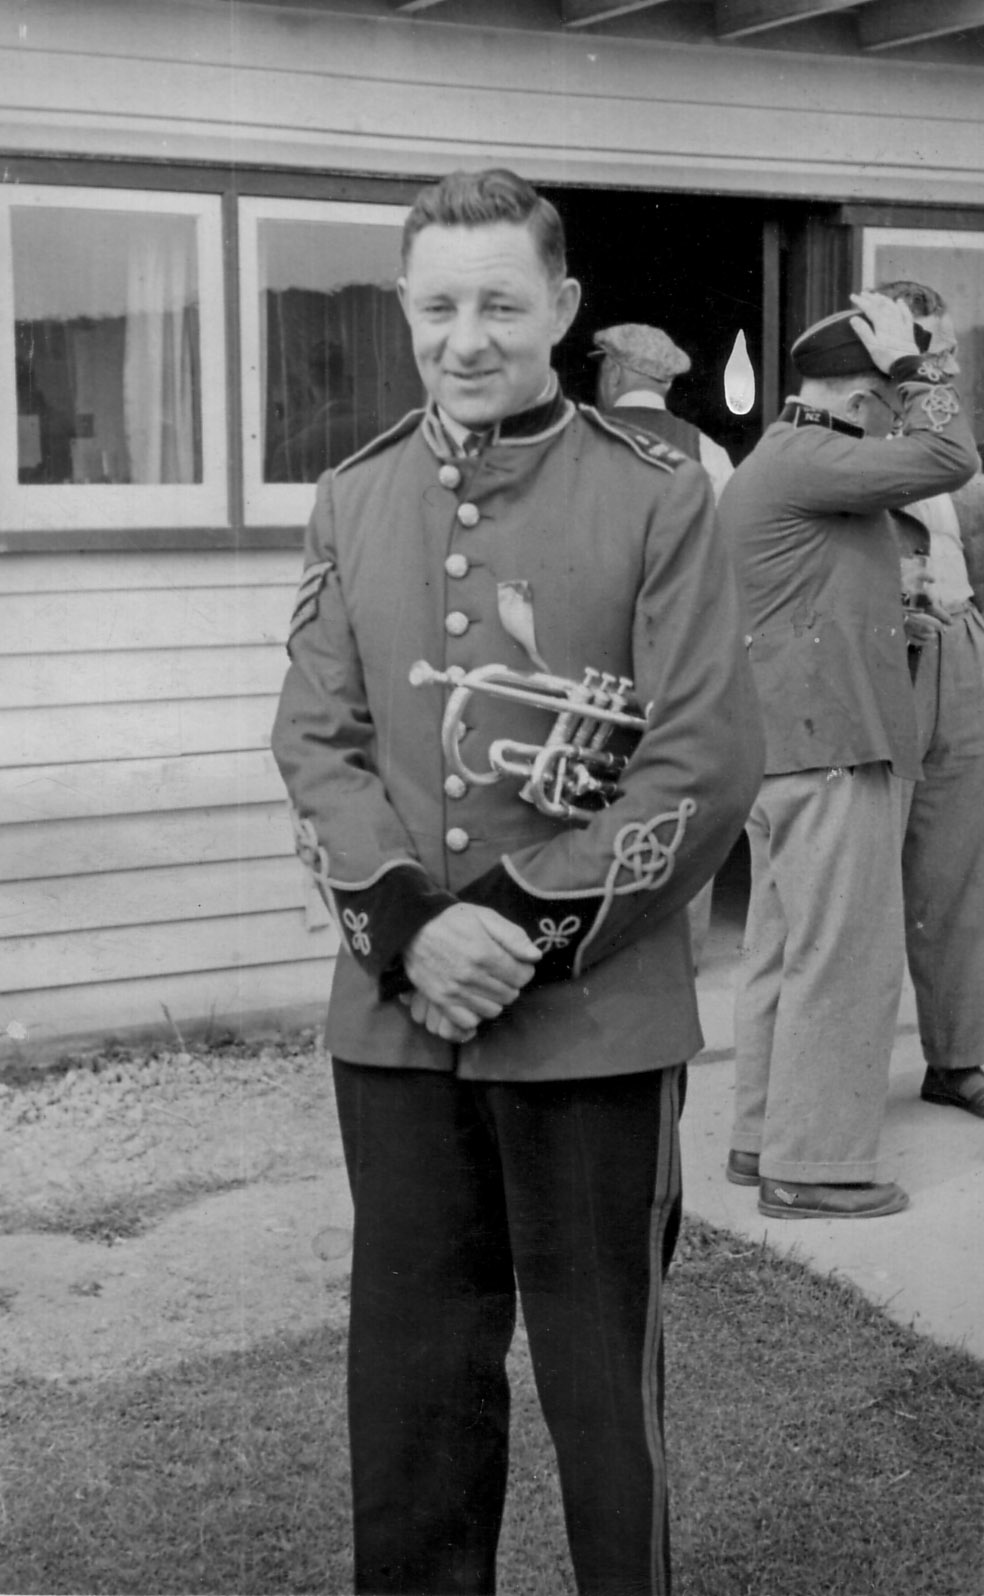 Edwin Luther Reeve, with his bugle, circa 1935